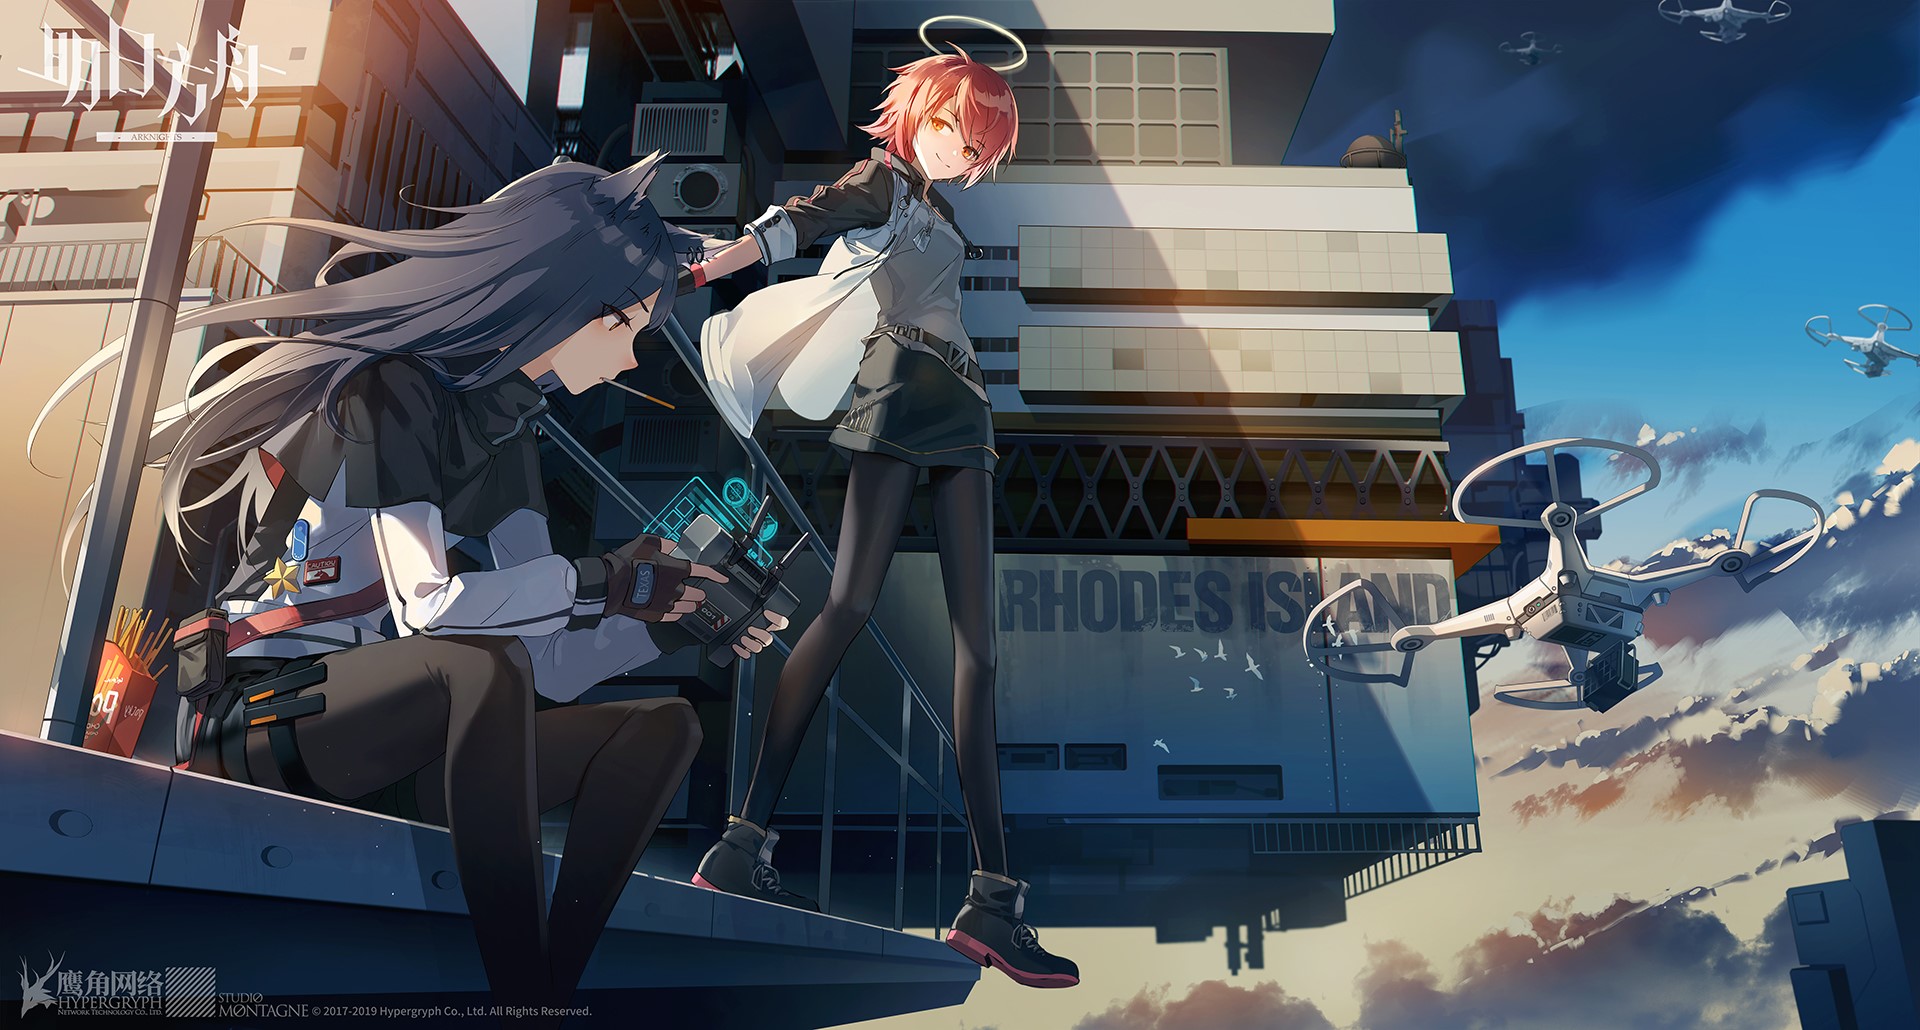 Wallpaper / Exusiai (Arknights), Texas (Arknights), Arknights, Anime, Clouds, Drone, UAVs, Silk Stockings, Seagulls, Pocky, Anime Girls, Low Angle